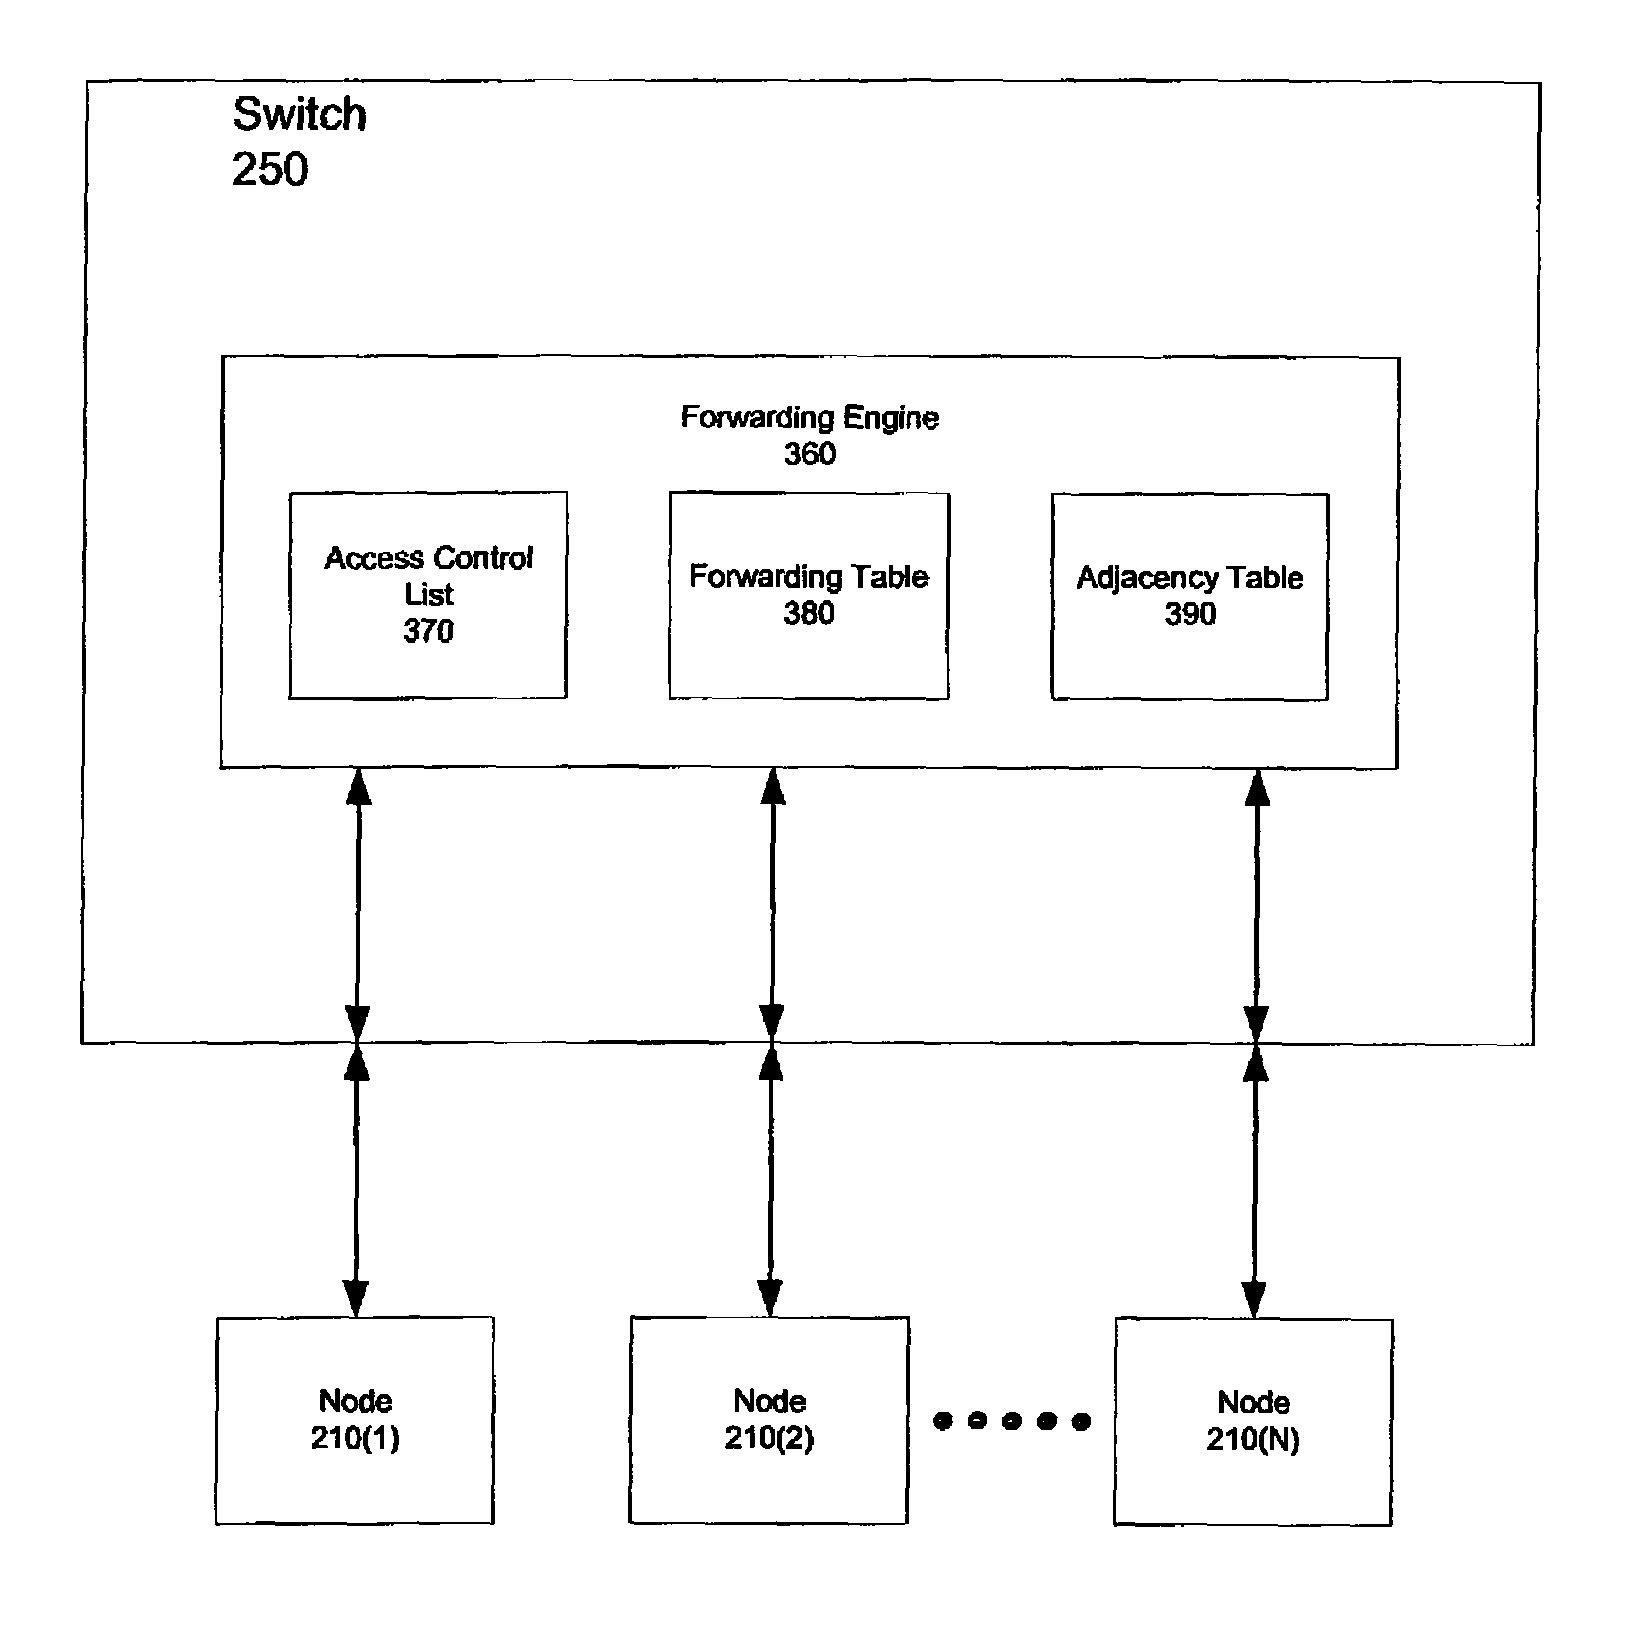 Method and system for policy-based forwarding